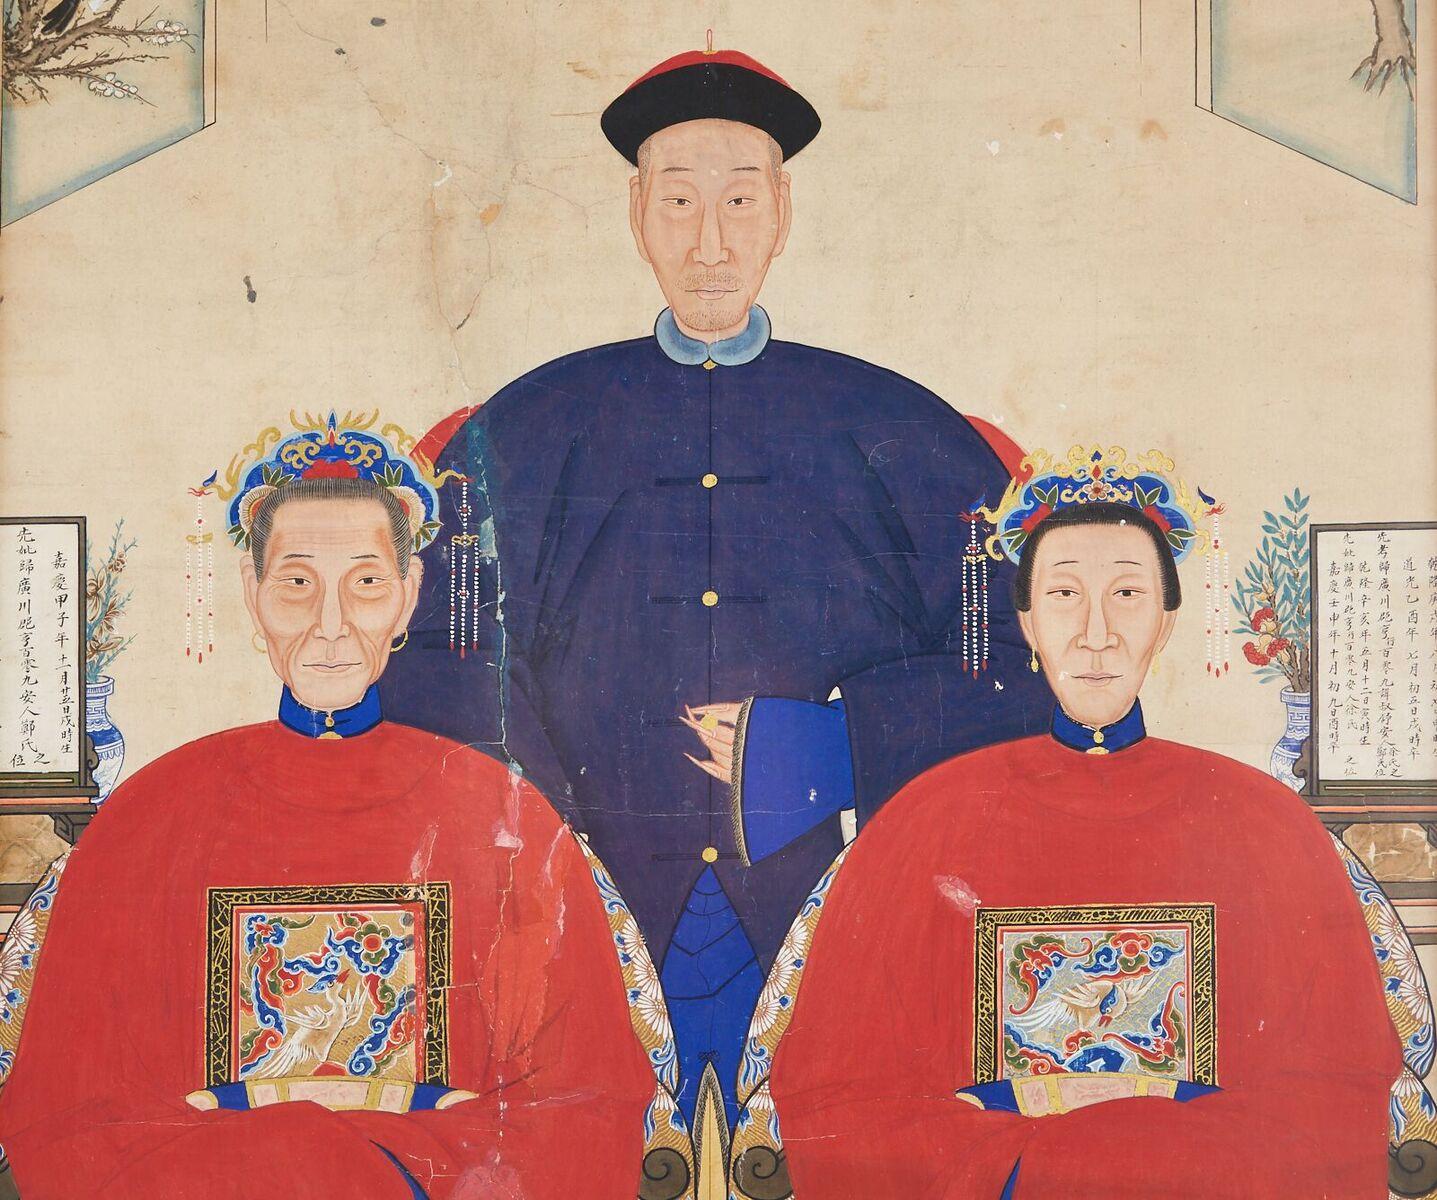 Large mounted and framed Chinese Qing dynasty ancestor portrait. Depicts one patriarch and two matriarch figures seated in their robes. Vibrant ink and color pigments with Chinese script on each side of the painting. The image has an aged patina